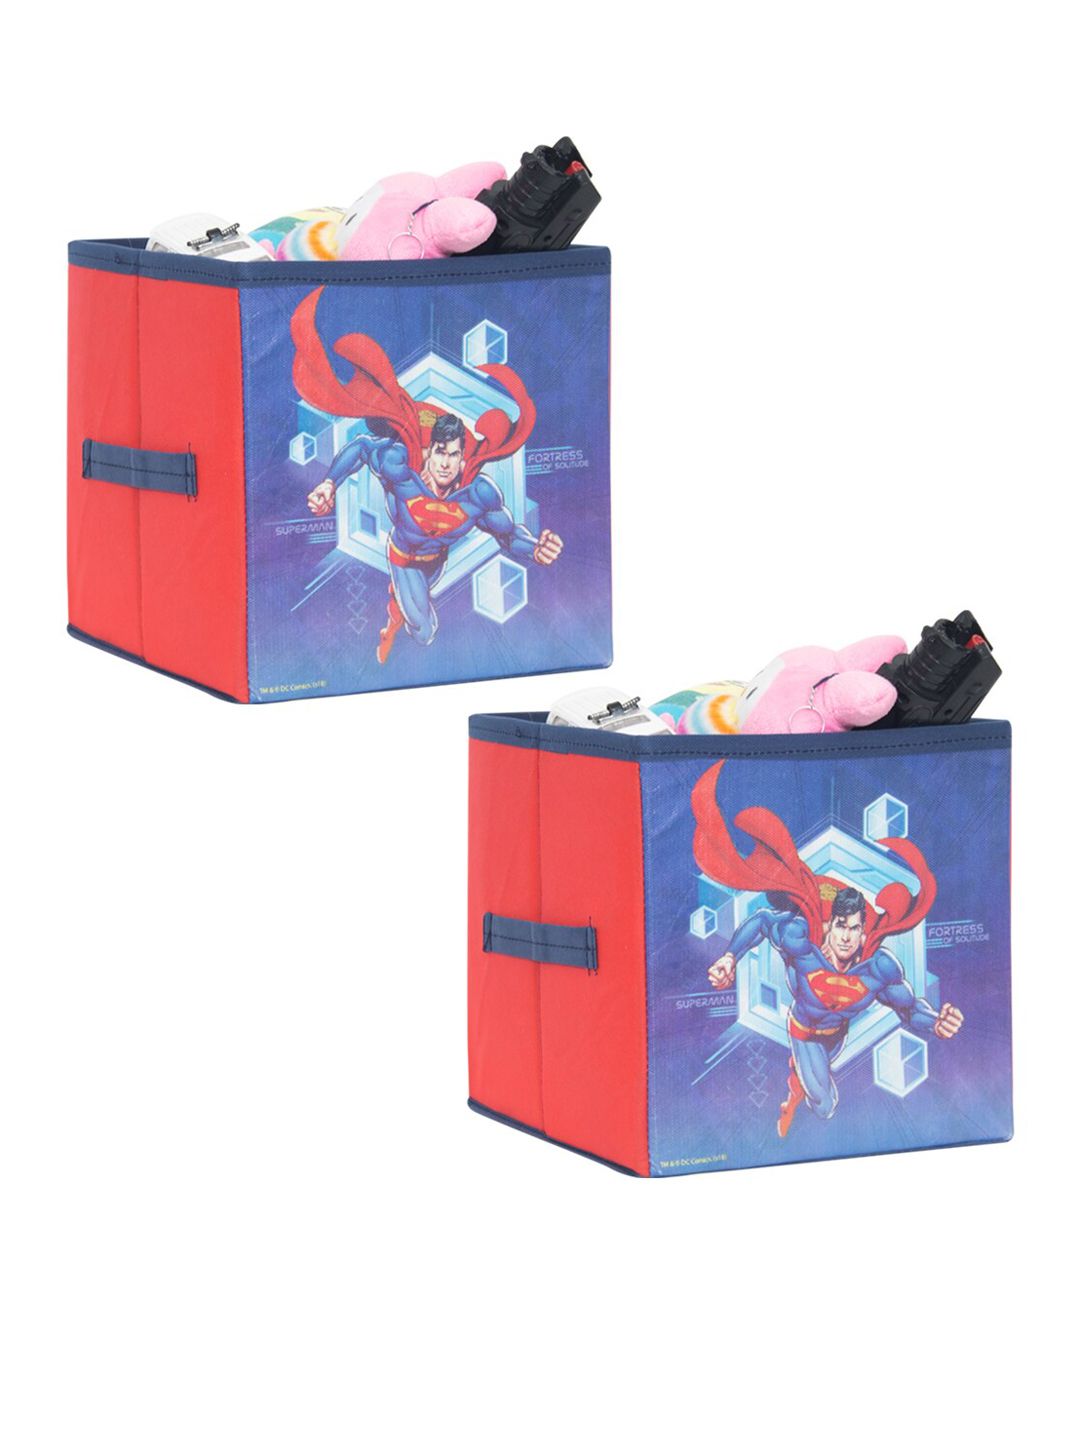 PrettyKrafts Red Set of 2 Superman Printed Foldable Kids Toys Organizer Storage Box Price in India